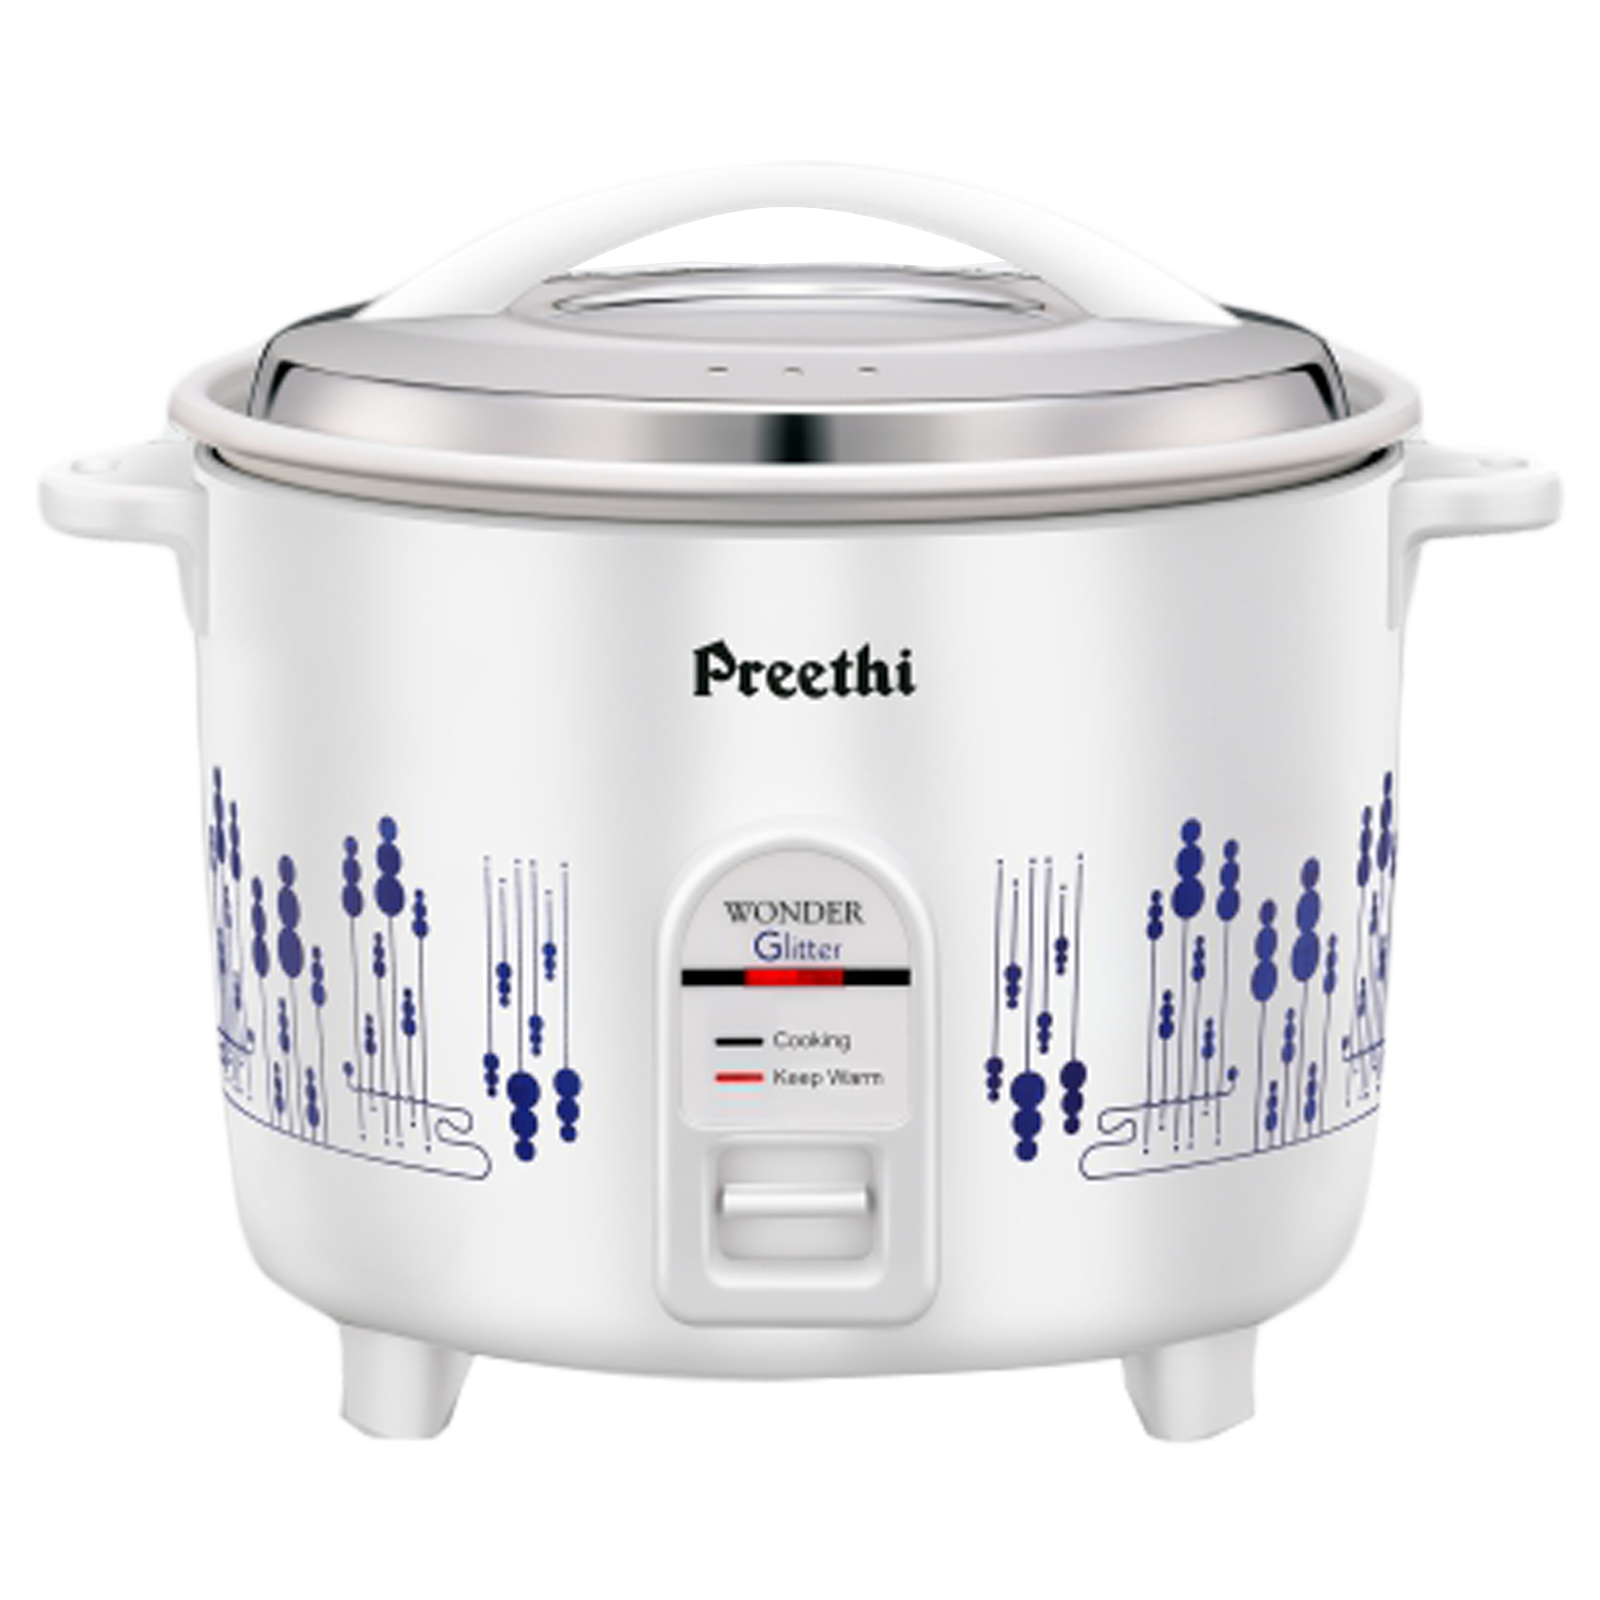 Preethi Glitter 1 Litre Electric Rice Cooker (Anodized Aluminium Pan, RC322, White)_1